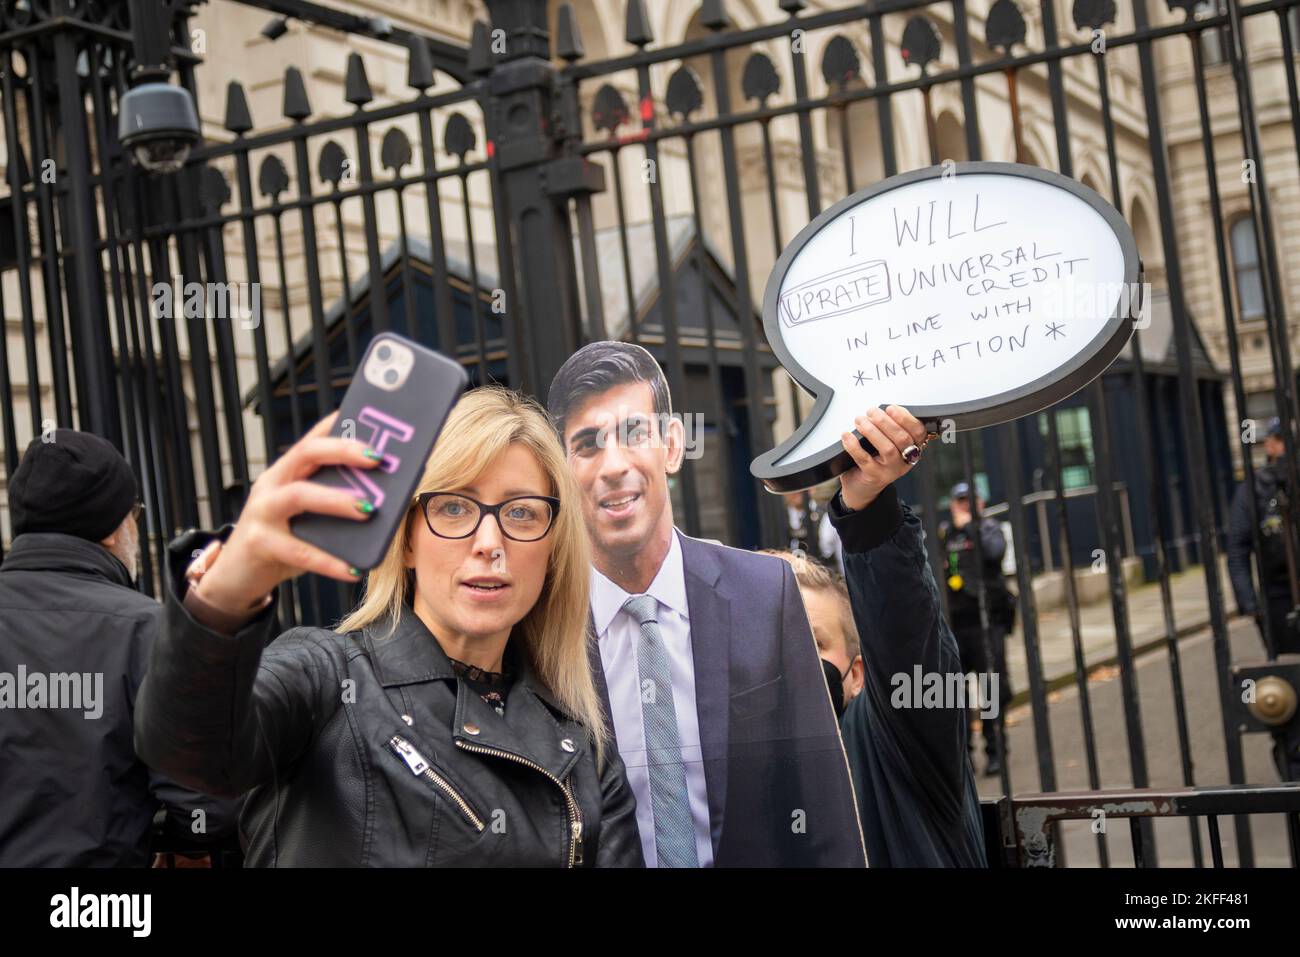 Protest outside Downing Street putting a speech bubble to a Rishi Sunak cut-out quoting 'I will uprate Universal Credit in line with inflation' Stock Photo